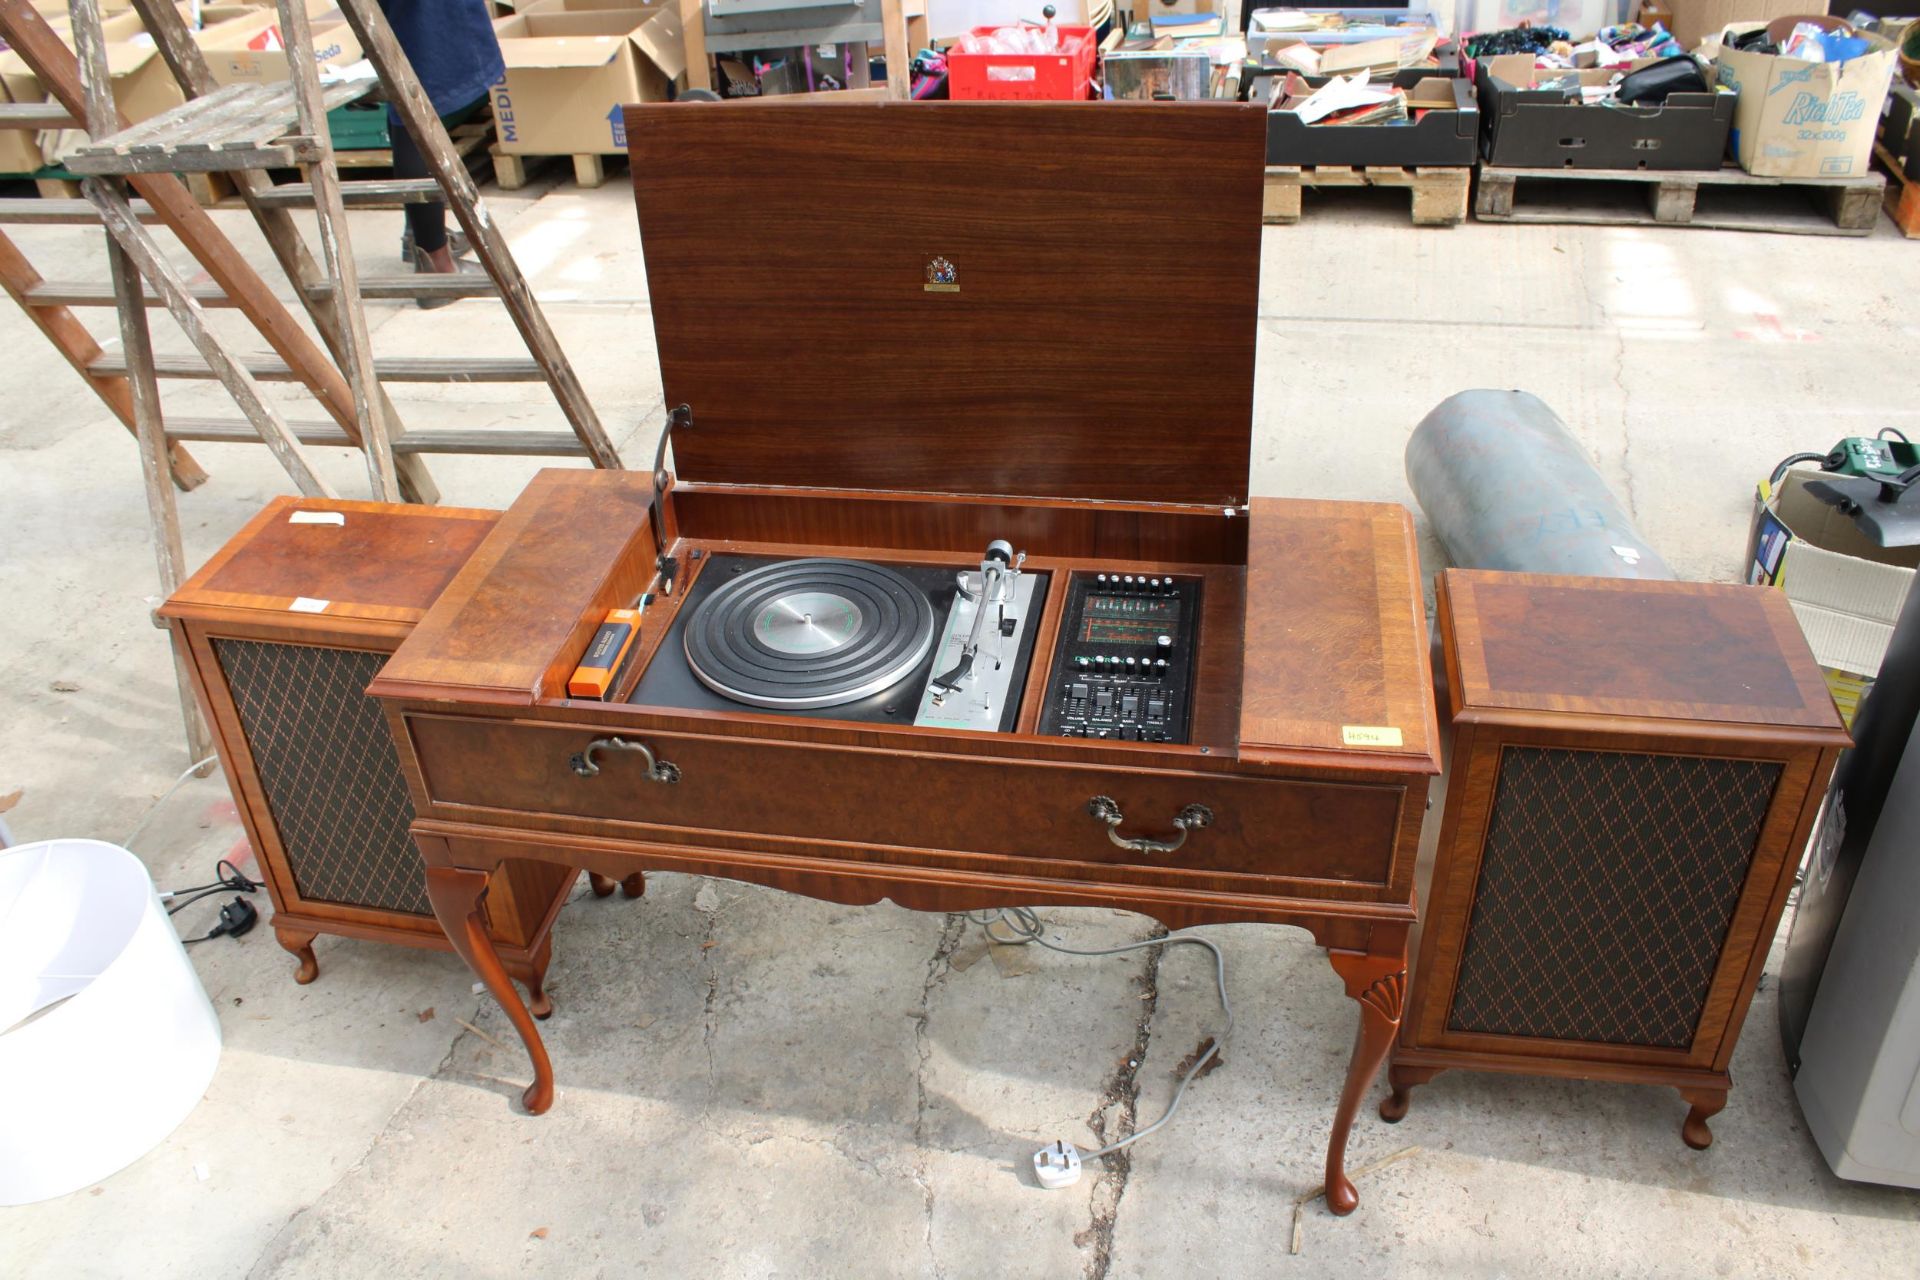 A VINTAGE MID CENTURY RADIOGRAM WITH A DRAYTON DECK AND SPEAKERS